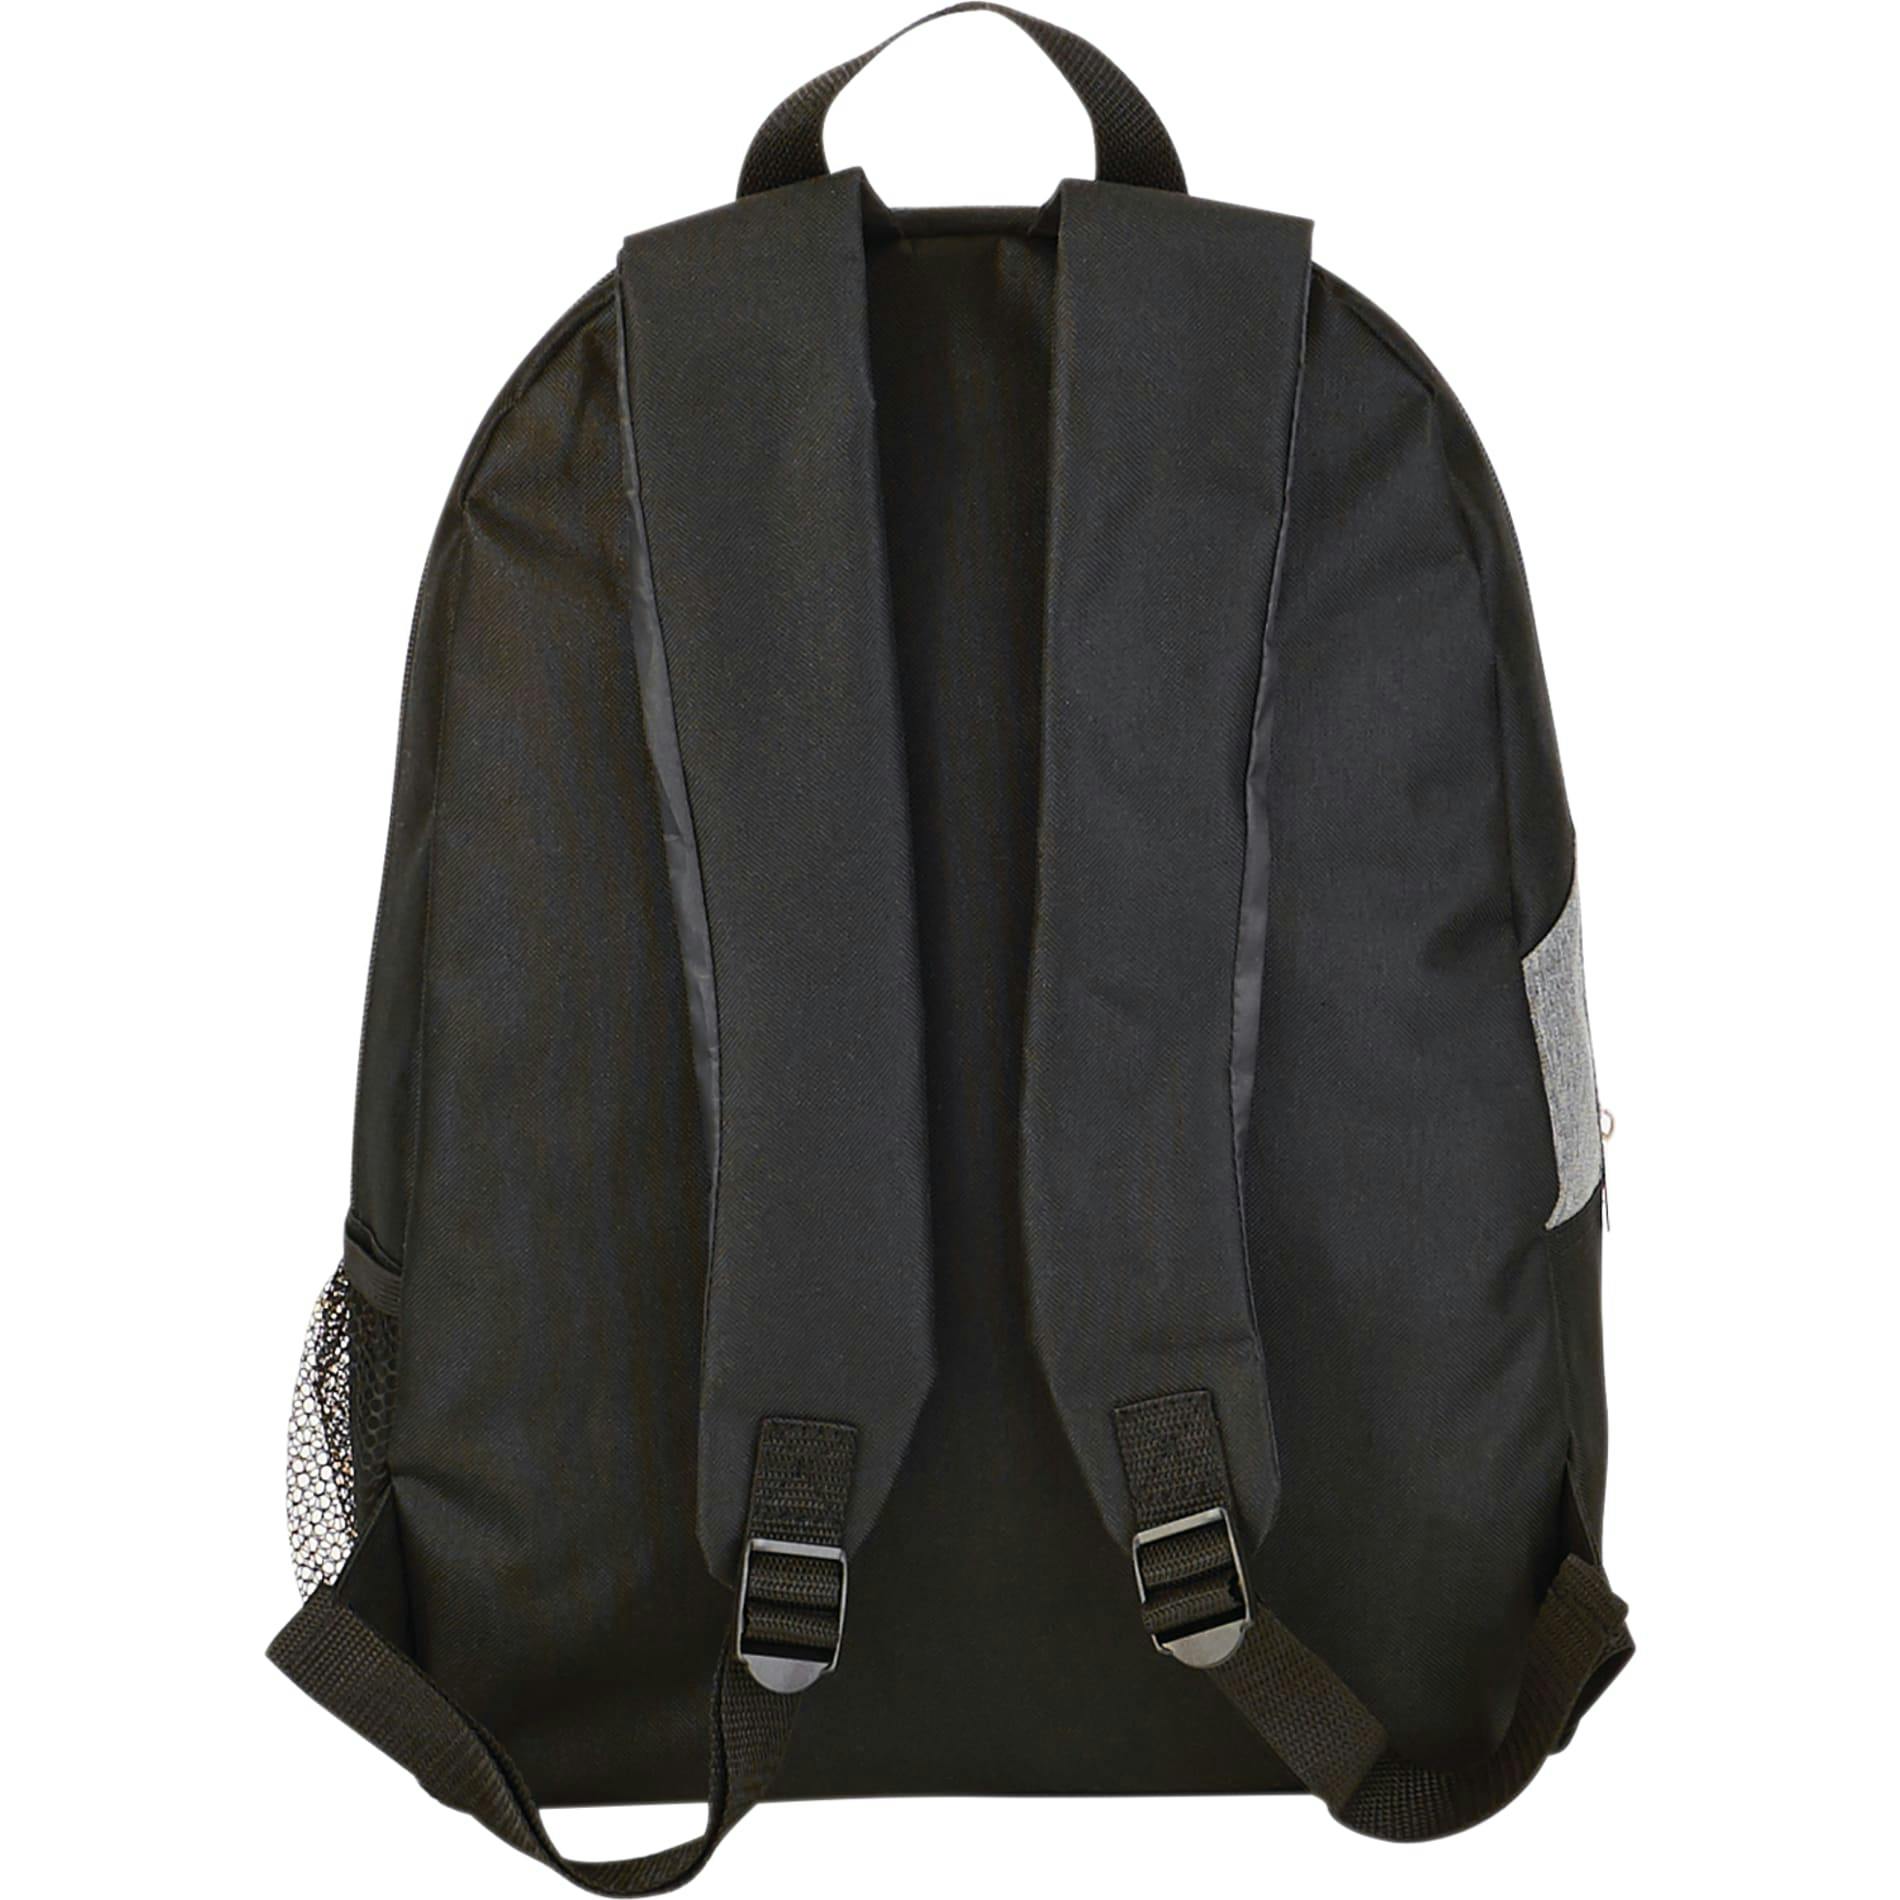 Tornado Deluxe Backpack - additional Image 4